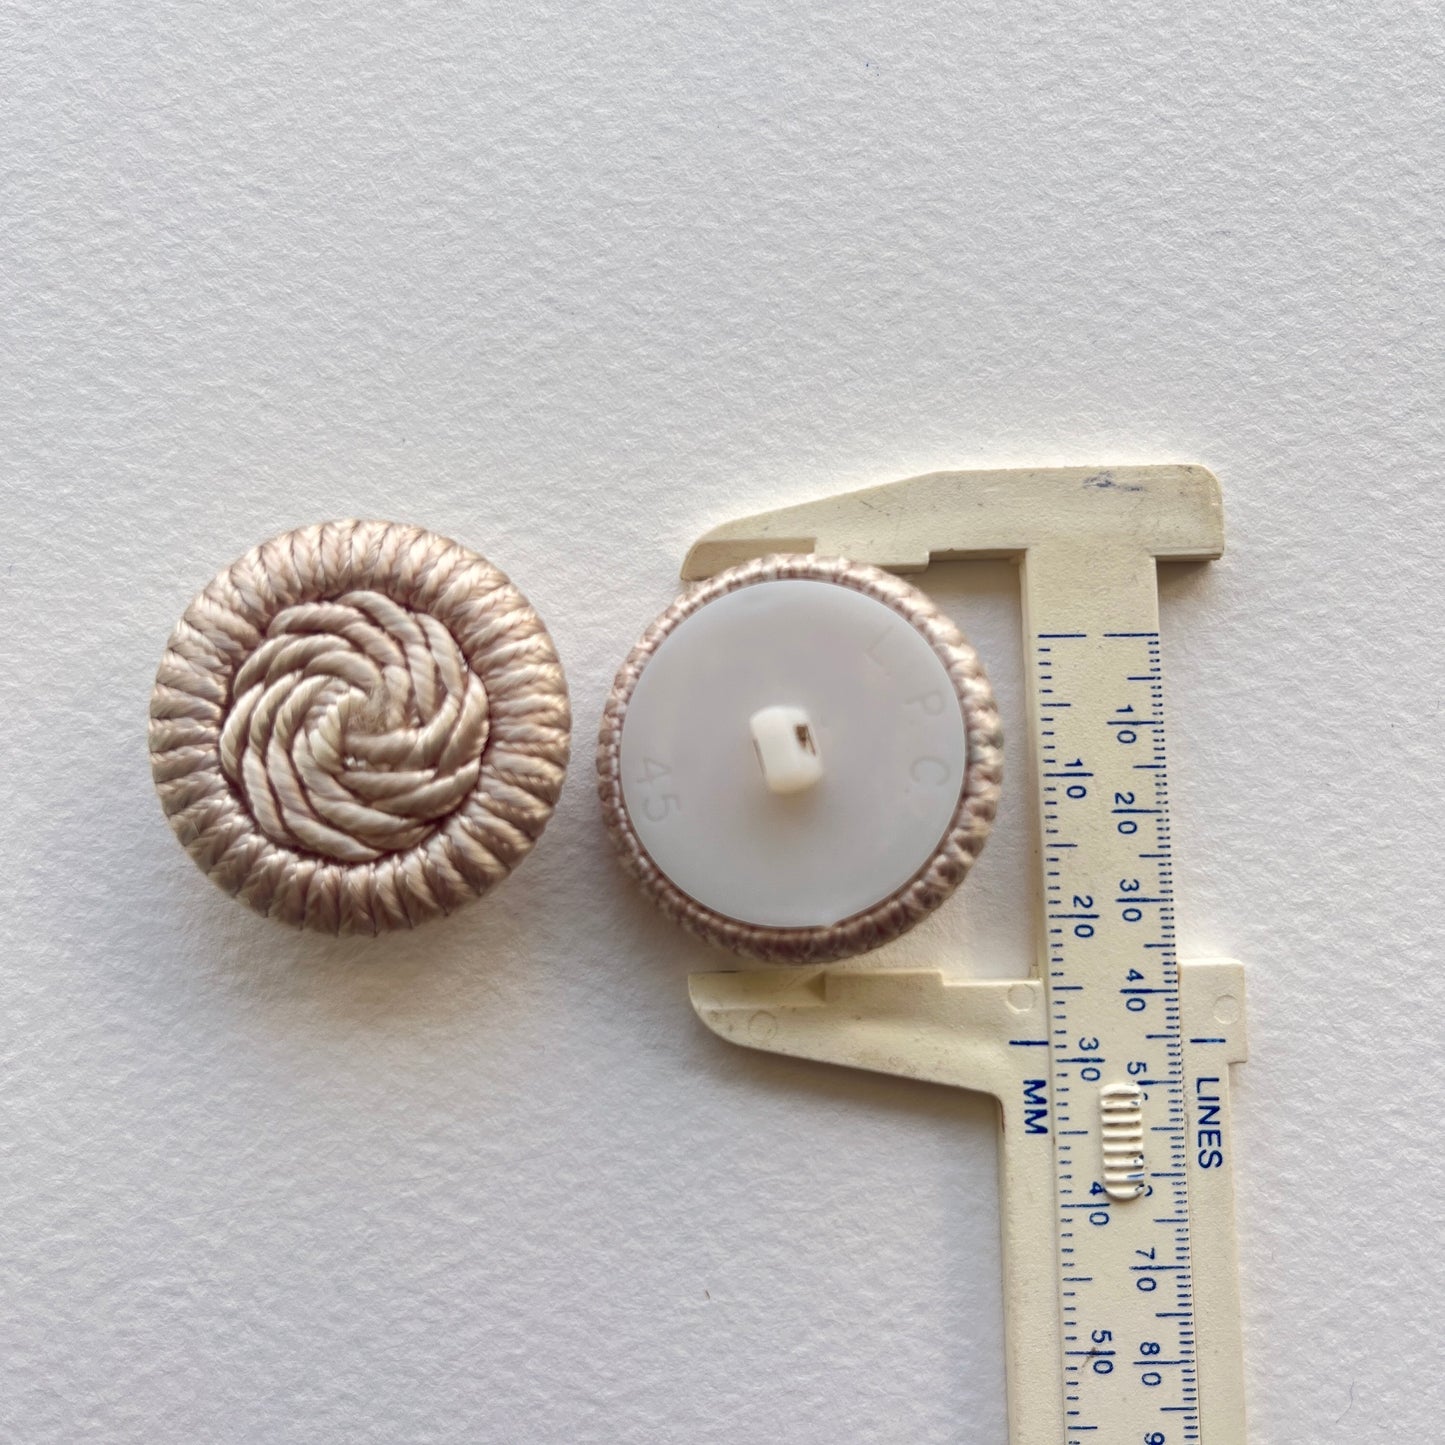 statement coat button, 2.9cm button, 1.25" button. Beigejacket button, silk corded button with knitted centres  in large sizes. soutache cord button, passementarie buttons, Vintage button.